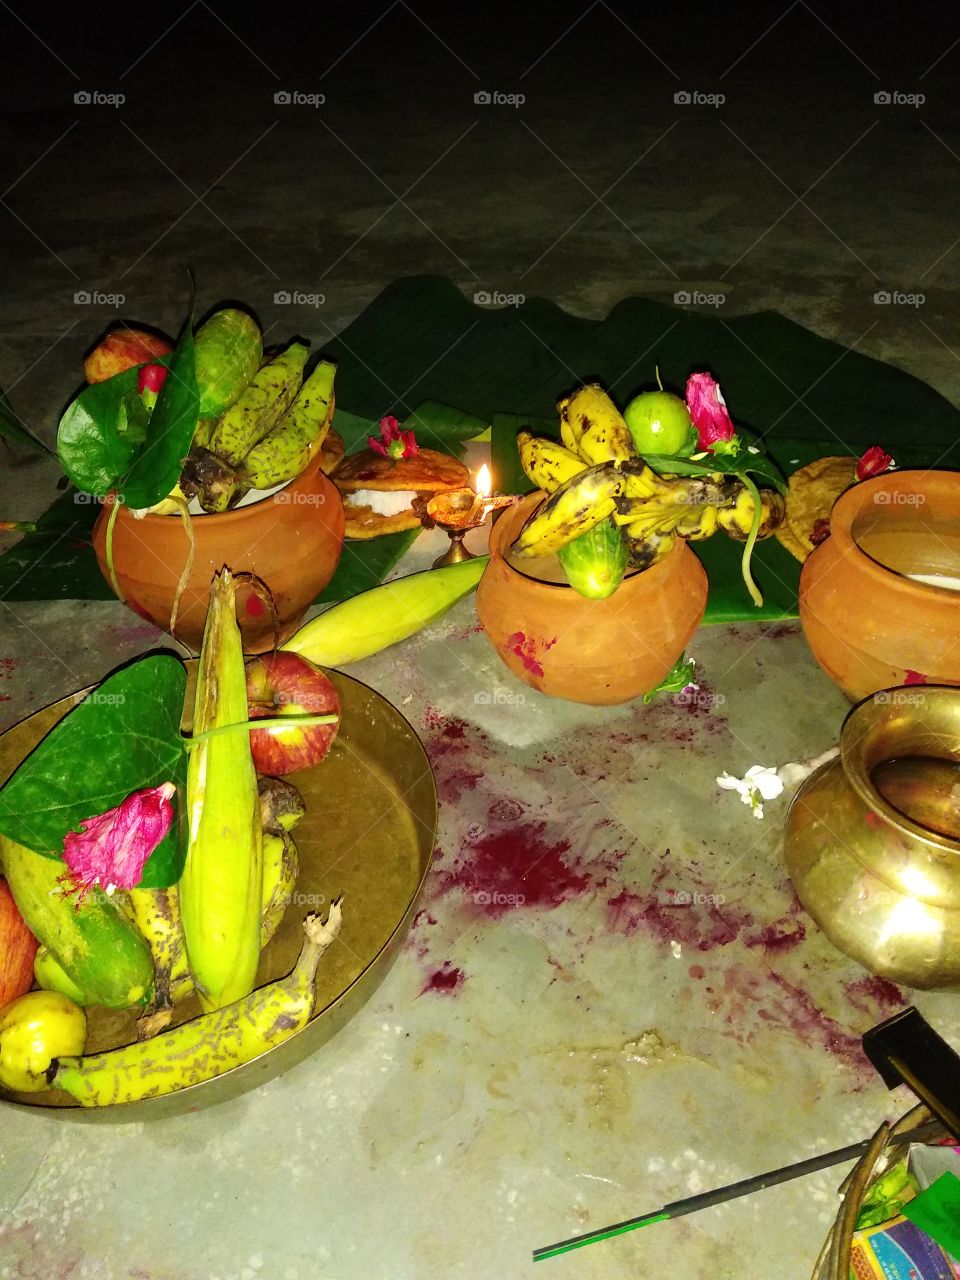 moon worship in bihar,moon worship culture,indian culture,worship with fruit and betel leaf,teej worship culture.